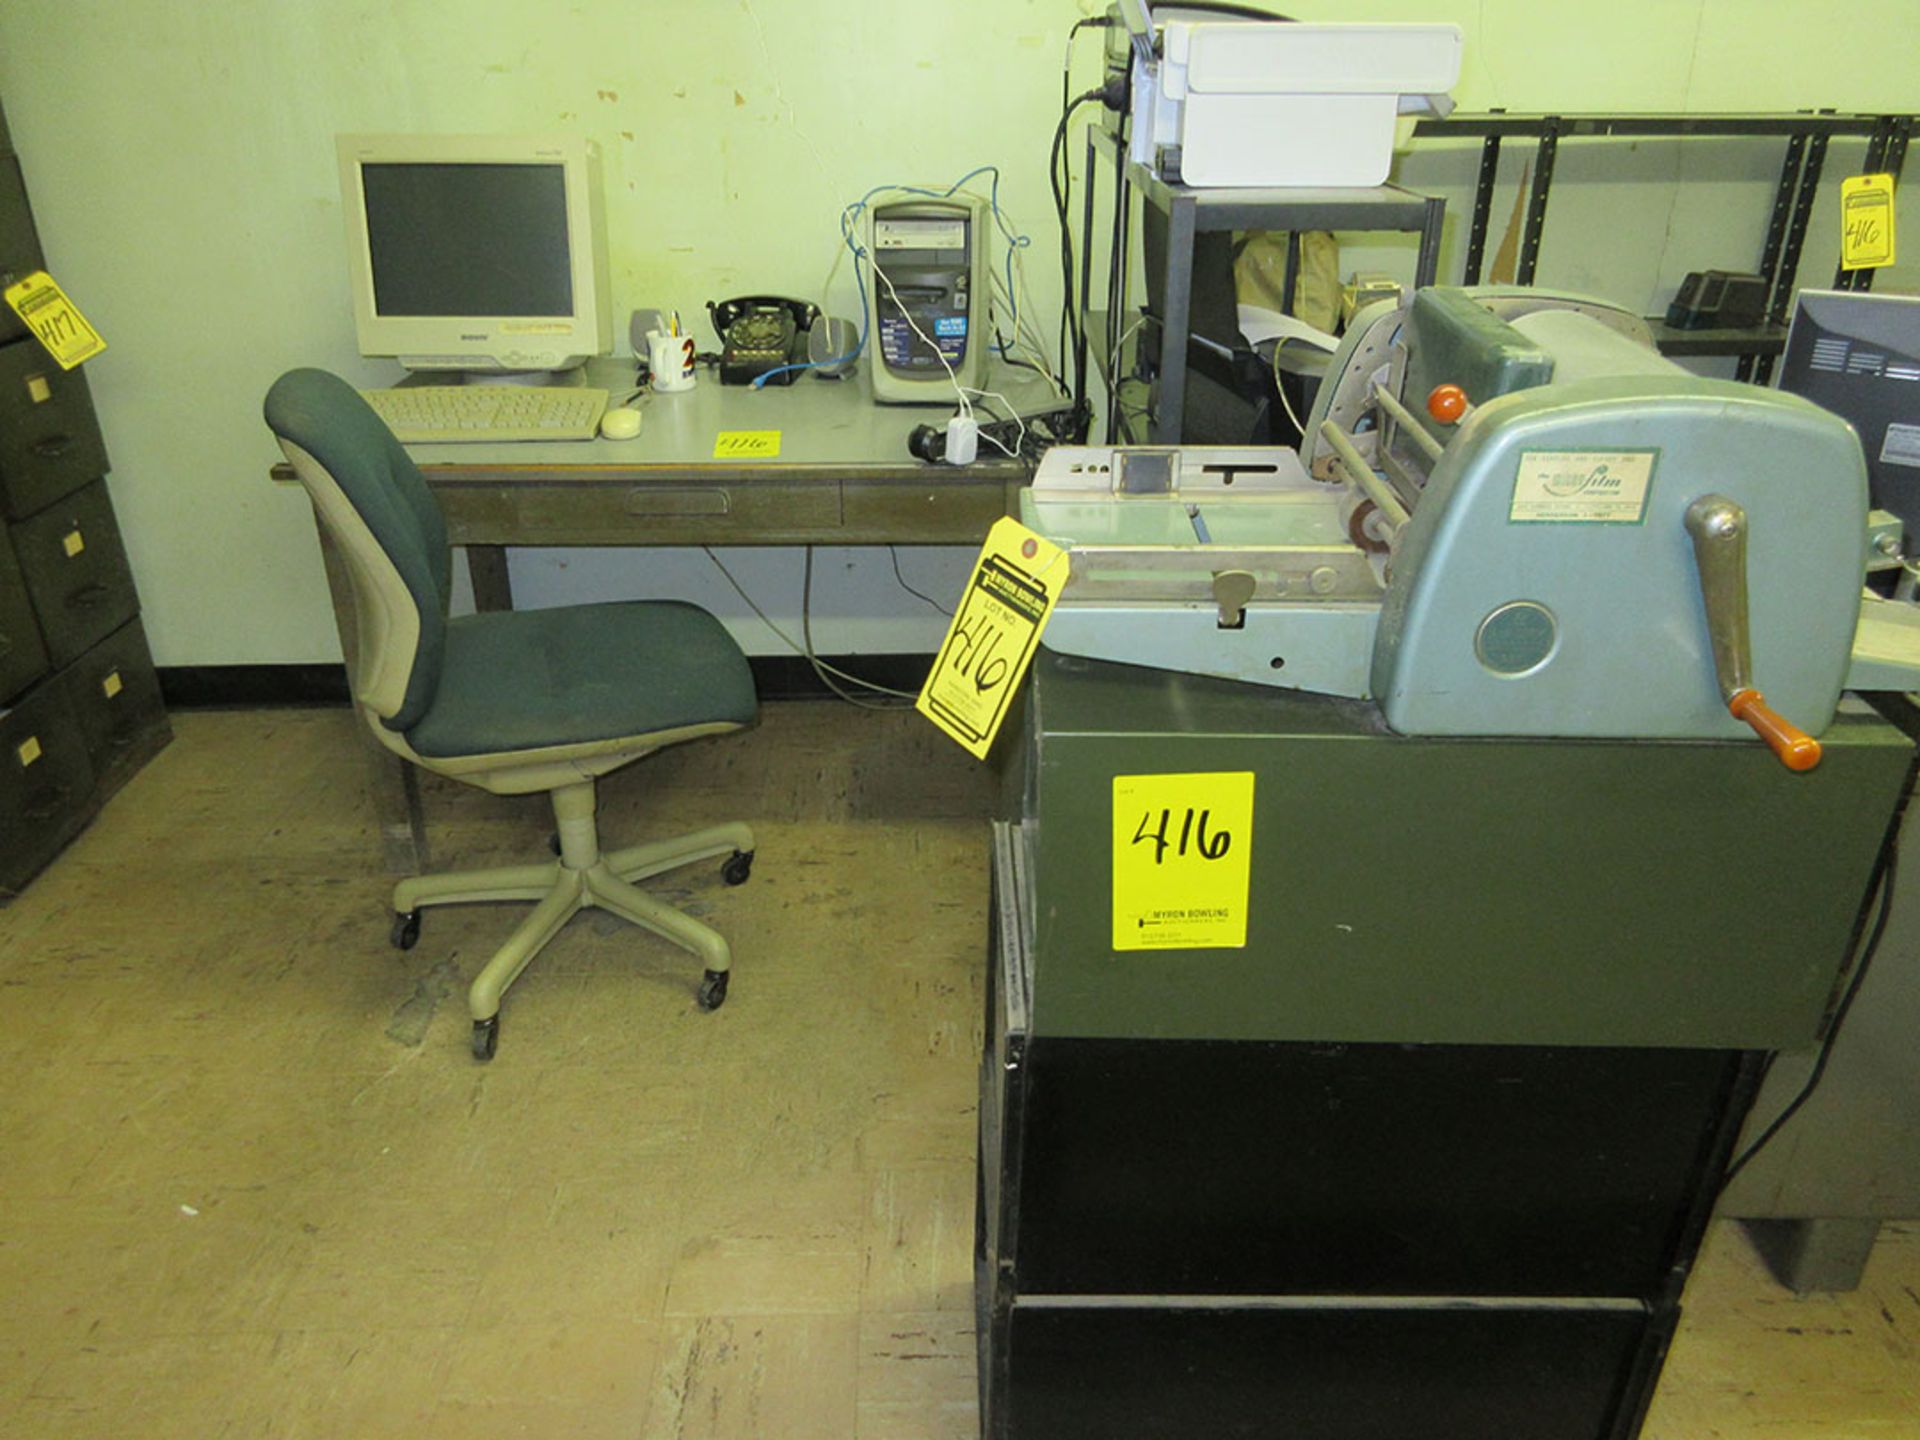 (3) DESKS, SHELF UNITS, CHAIRS, AND ANTIQUE OFFICE MACHINES - Image 3 of 3